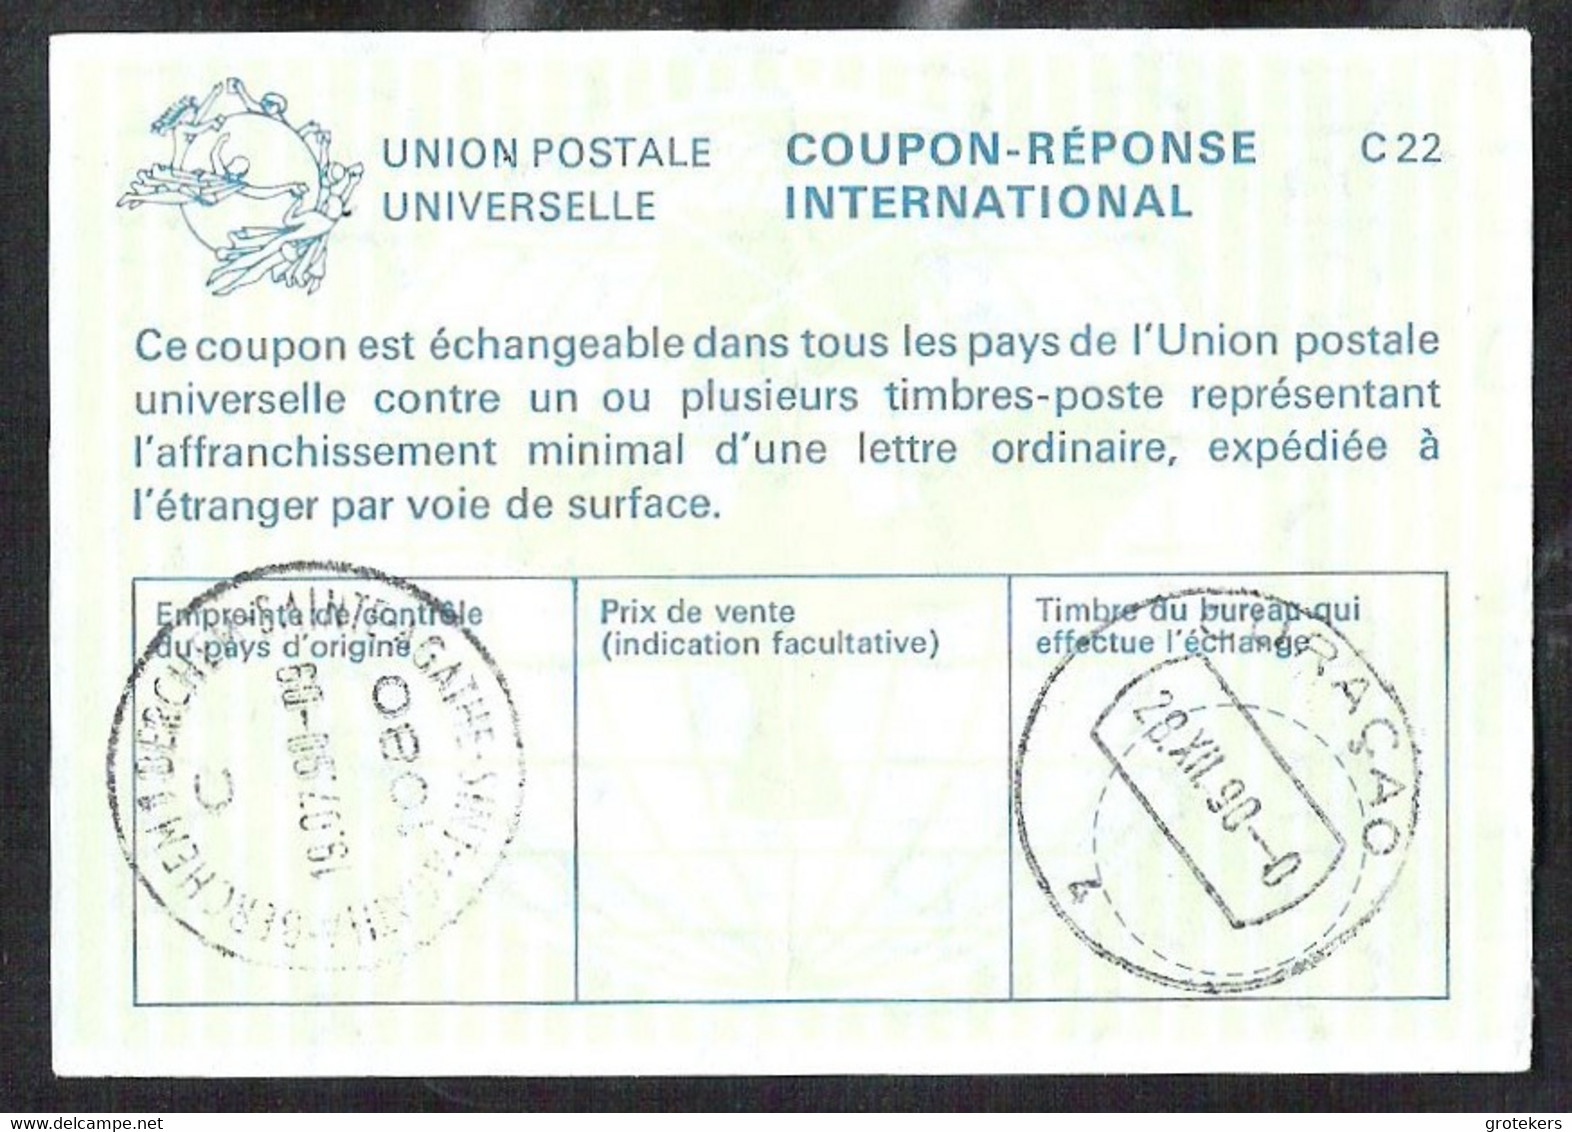 BELGIUM International Reply Coupon Issued BERCHEM Sainte Agathe 1990 Cashed In Curaçao - Internationale Antwoordcoupons